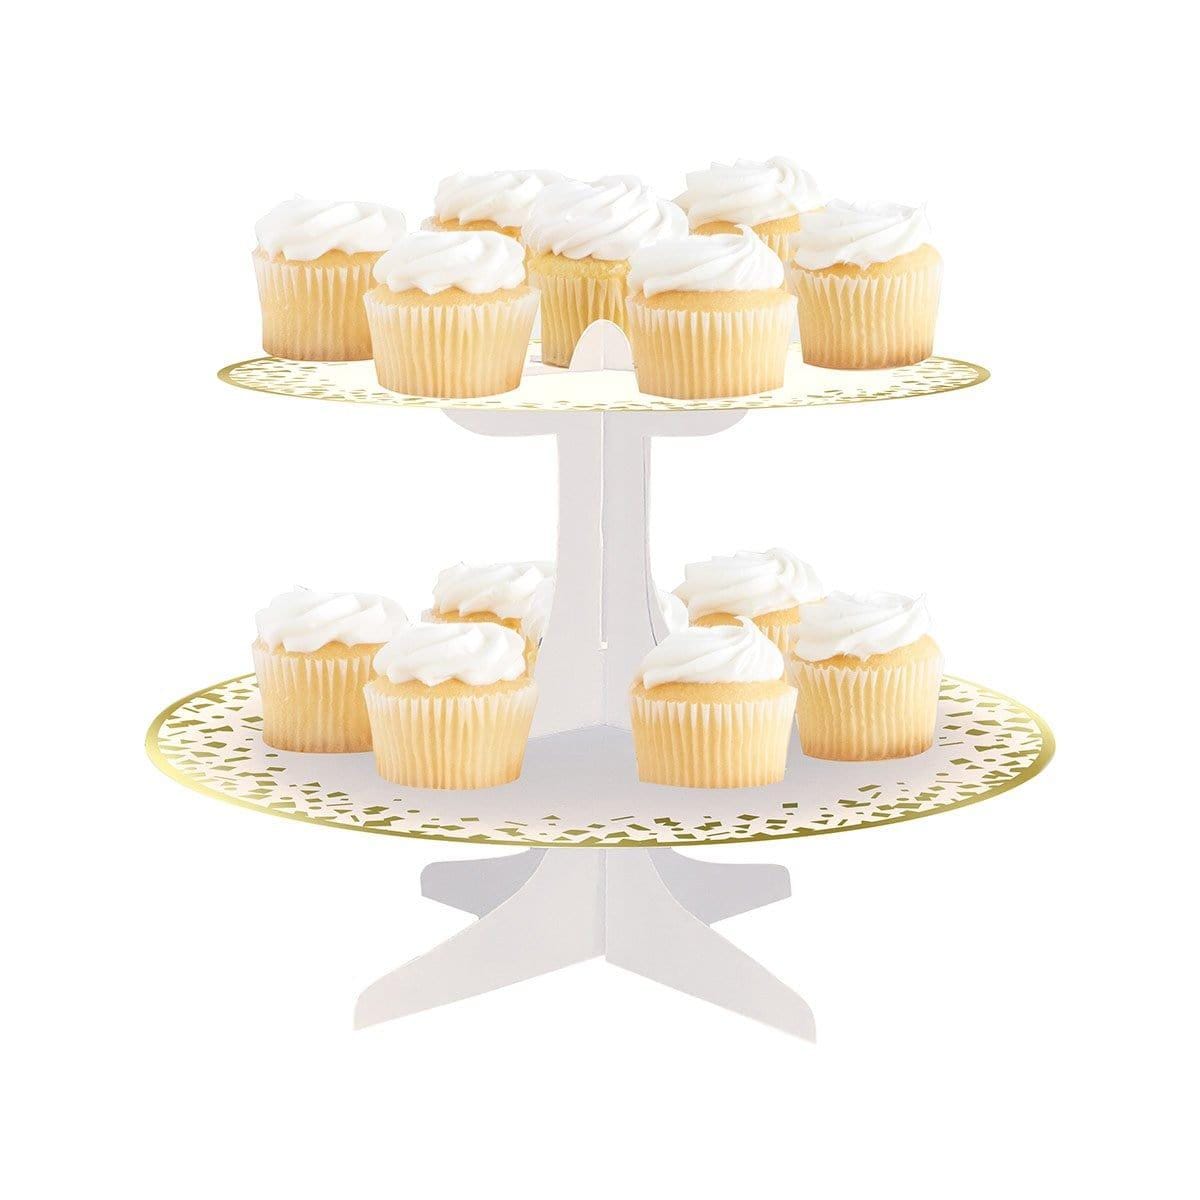 Buy General Birthday Gold Confetti Birthday Cupcake Stand sold at Party Expert